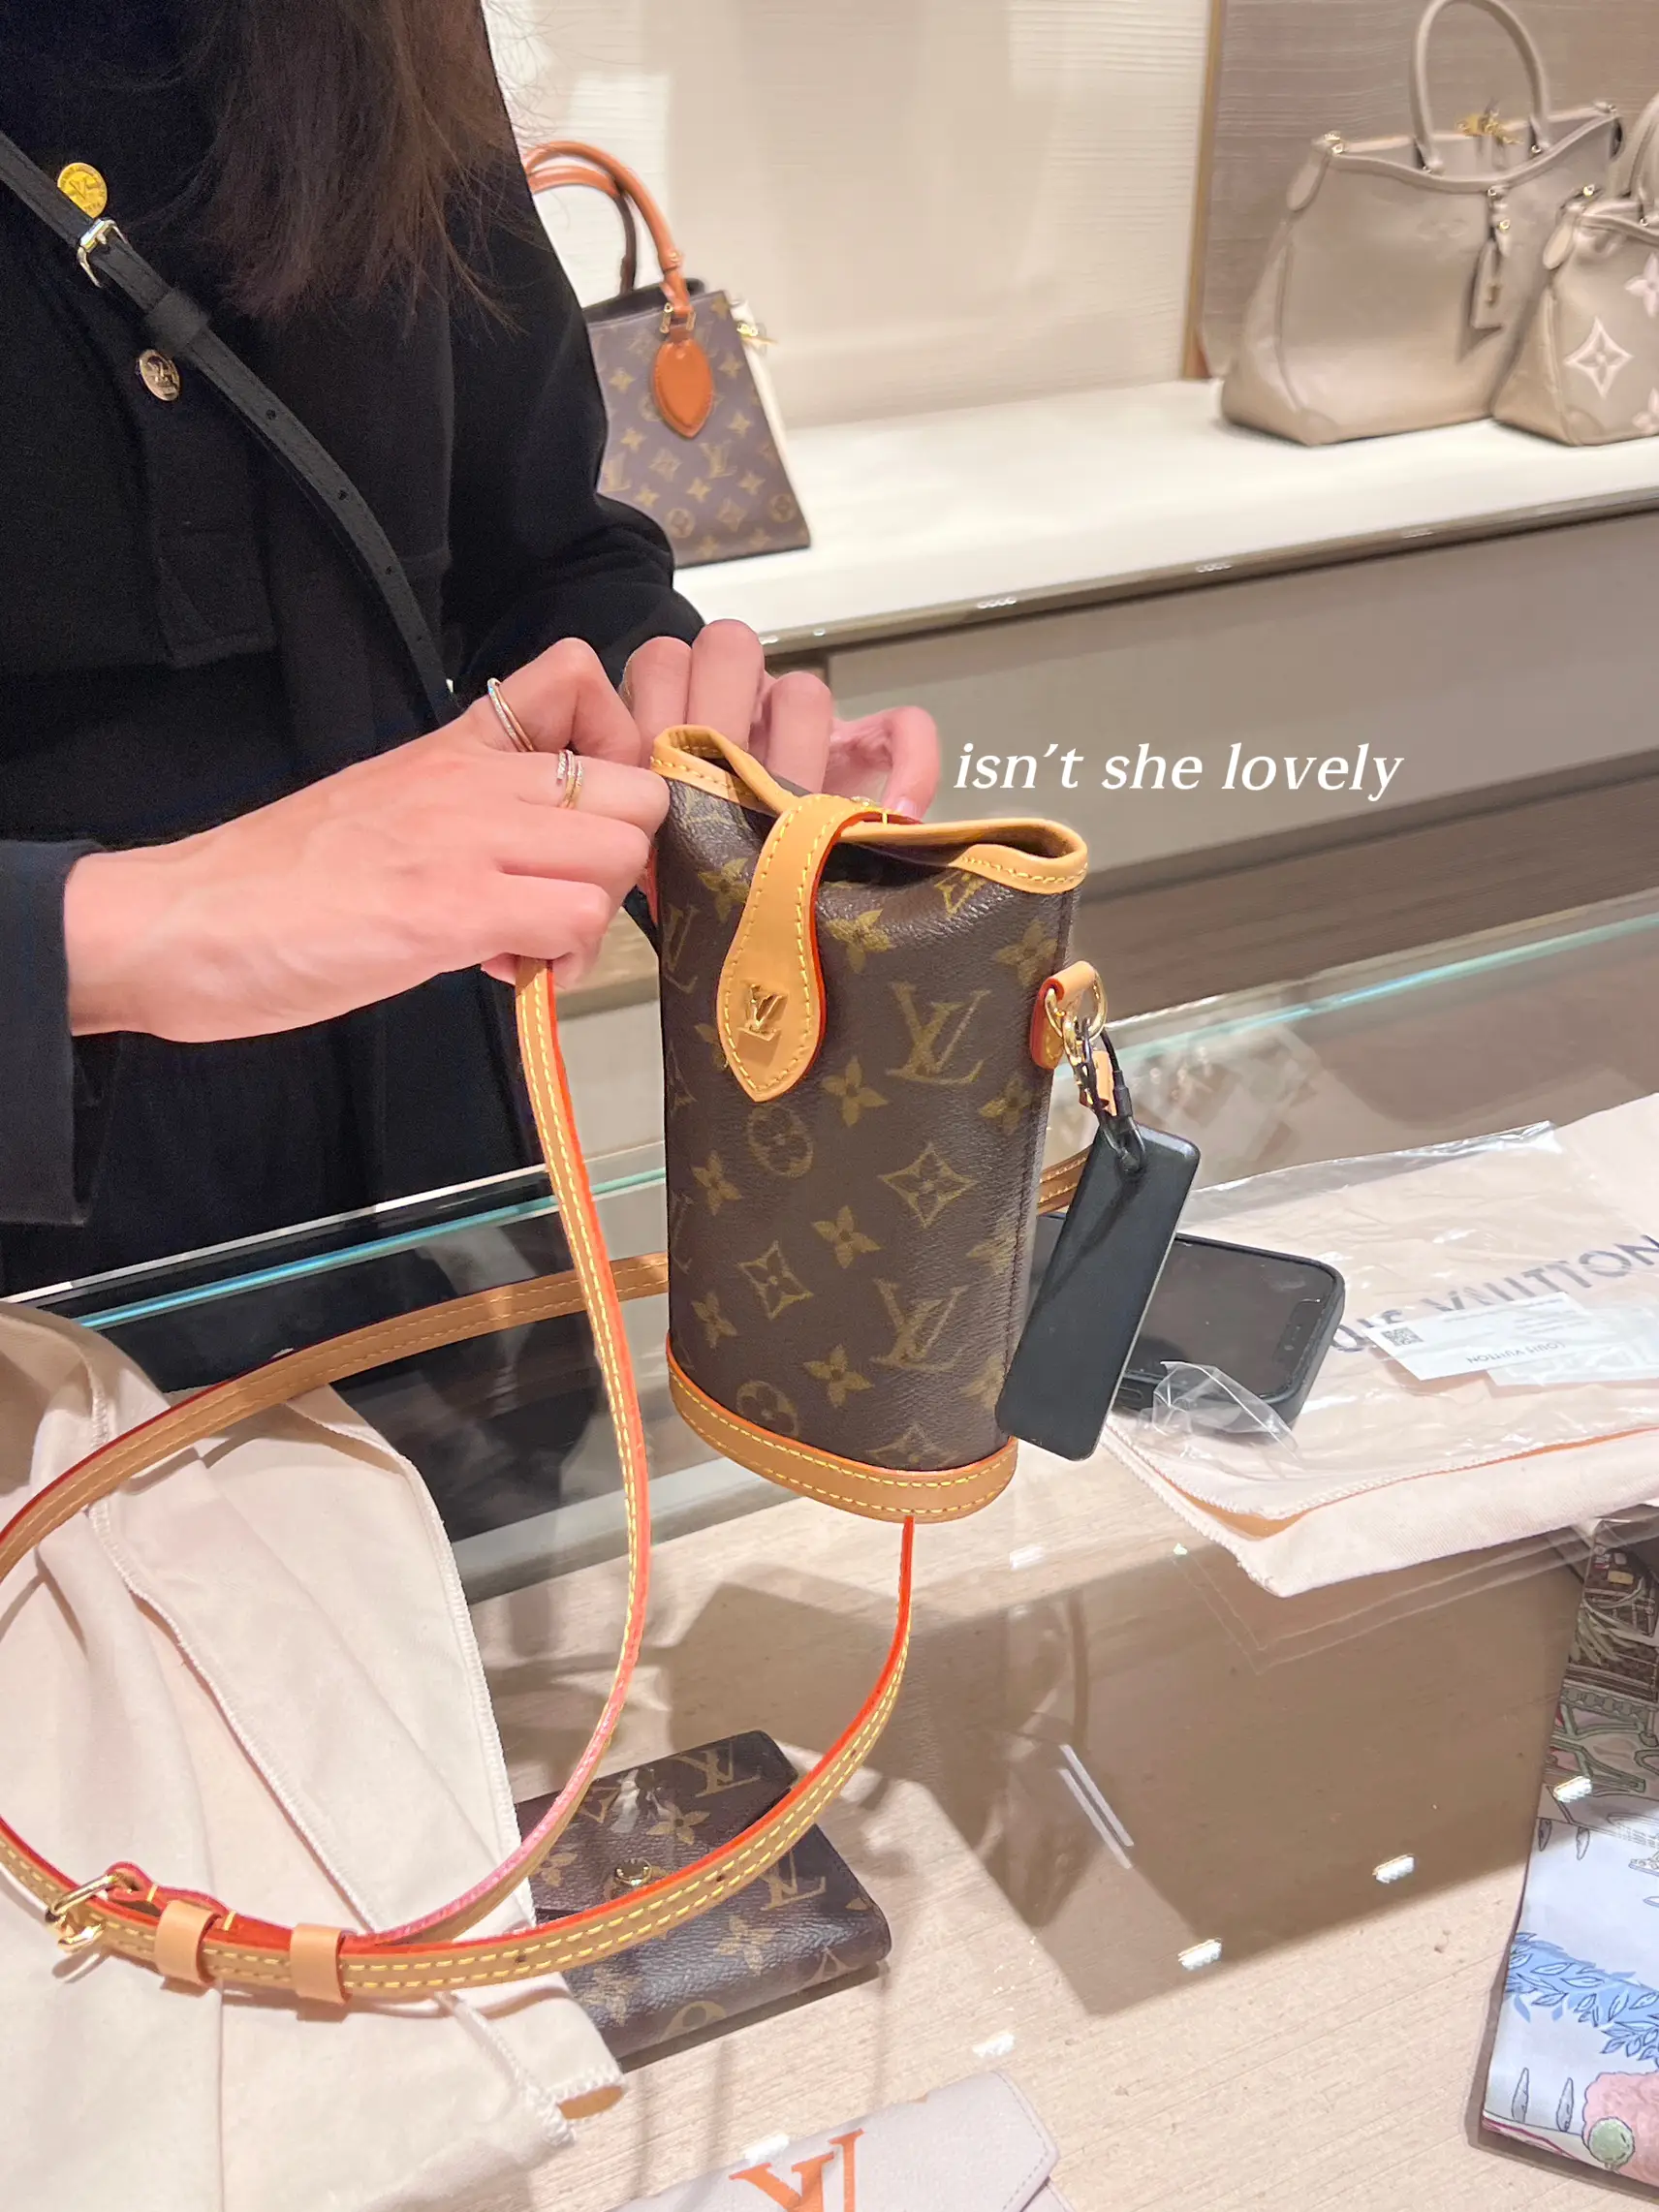 A Louis Vuitton handbag is now cheaper to buy in London than